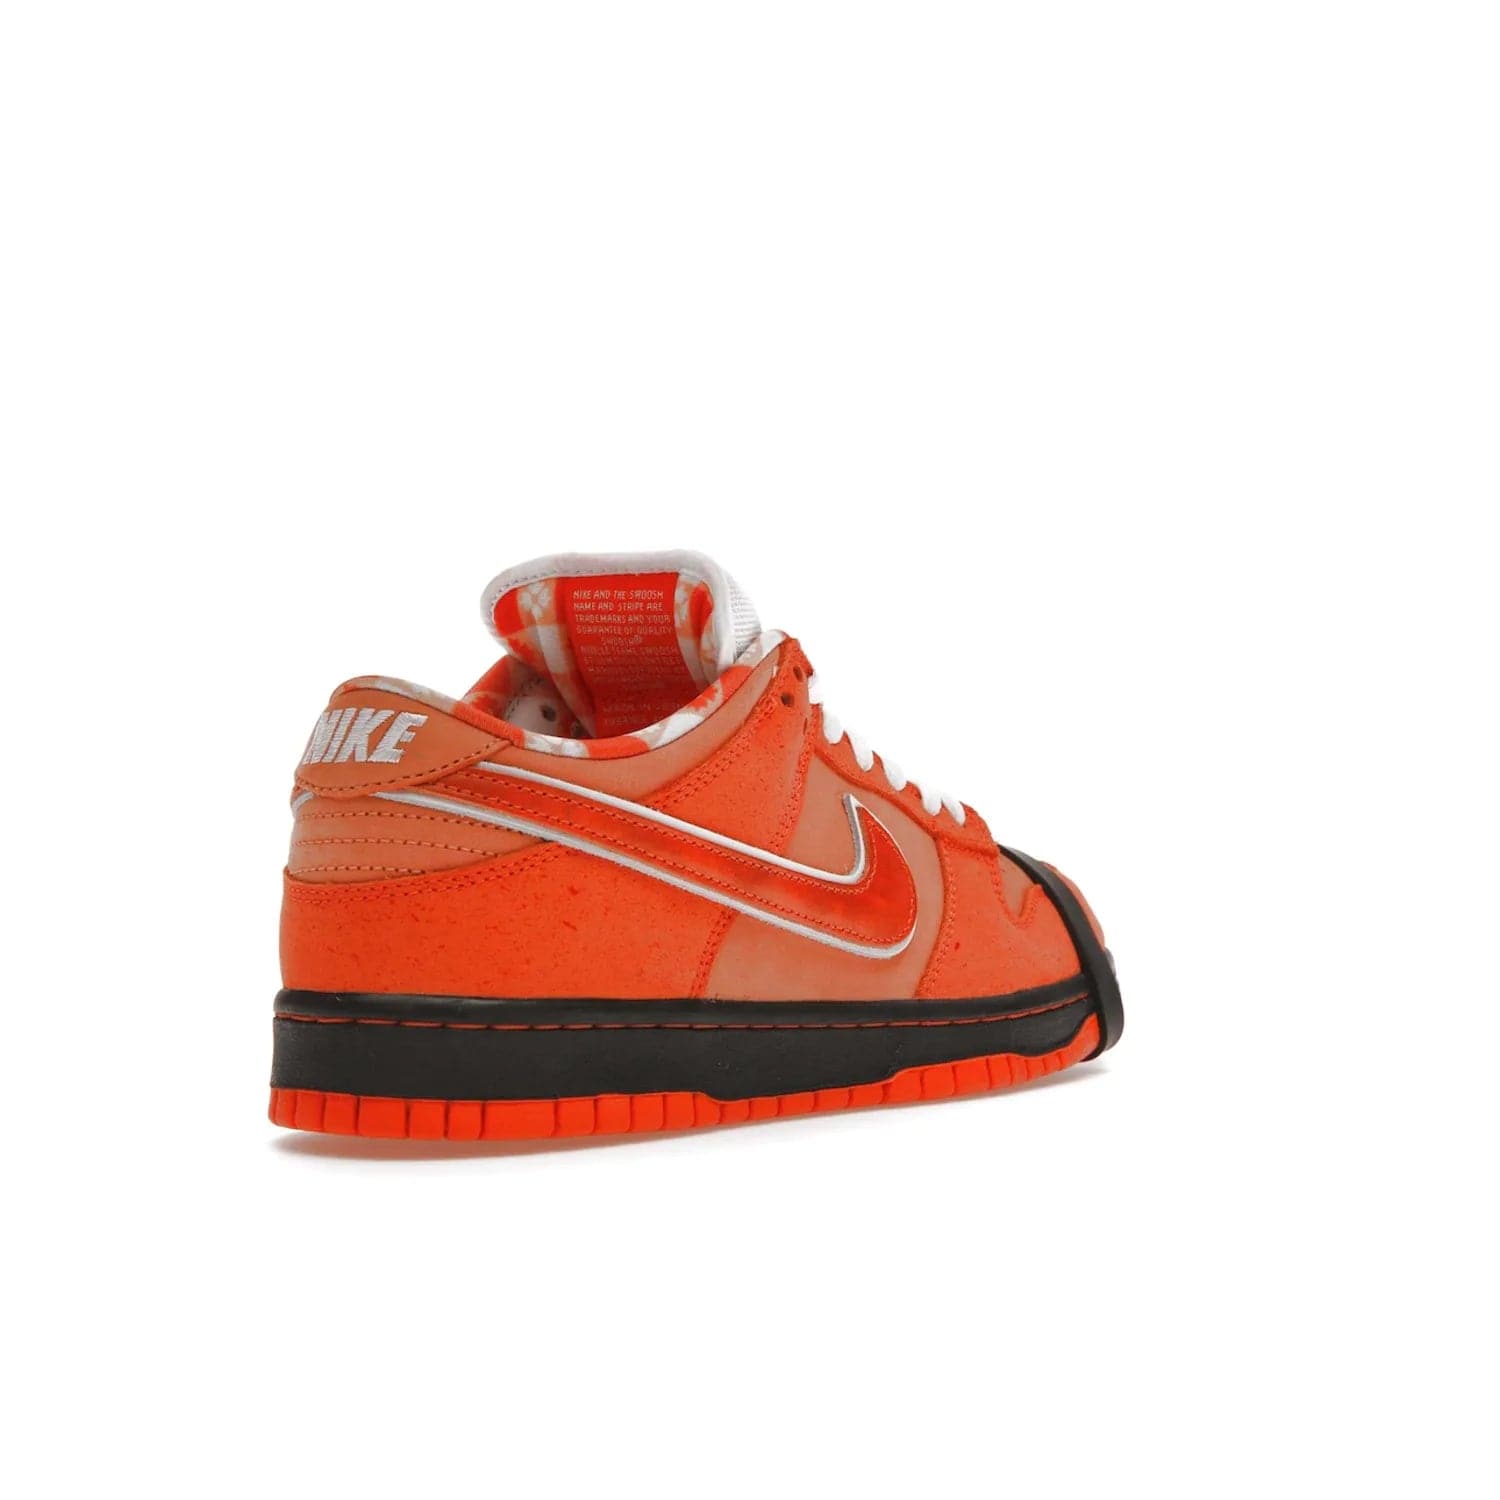 Nike SB Dunk Low Concepts Orange Lobster - Image 32 - Only at www.BallersClubKickz.com - Make a statement with the Nike SB Dunk Low Concepts Orange Lobster. Variety of orange hues, nubuck upper, bib-inspired lining & rubber outsole create bold look & comfortable blend of style. Available December 20th, 2022.